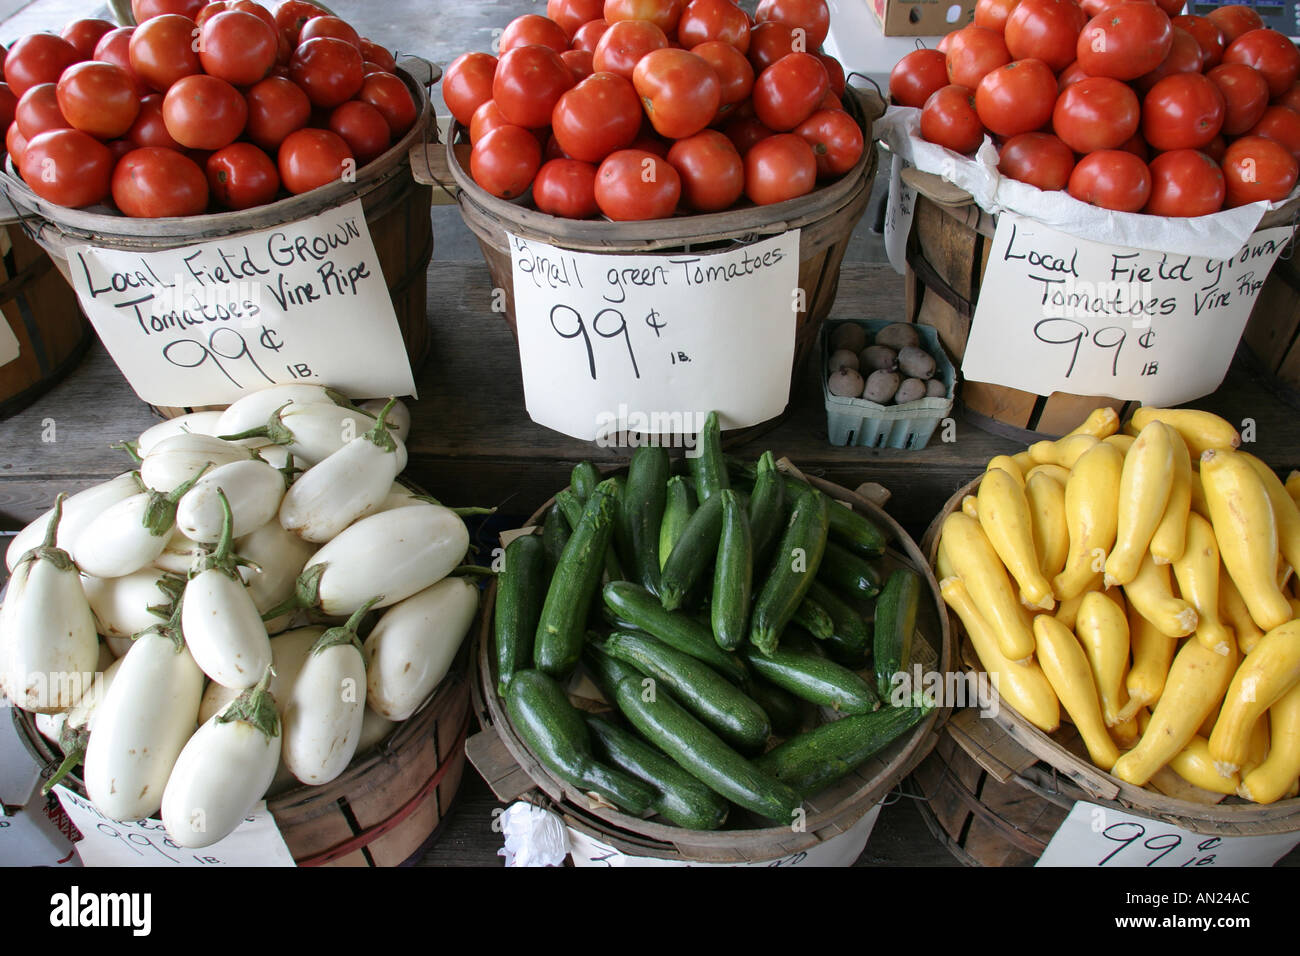 Raleigh North Carolina,State Farmers Market,produce,fruit,vegetable,vegetables,food,vendor vendors stall stalls booth market marketplace,tradition,mar Stock Photo